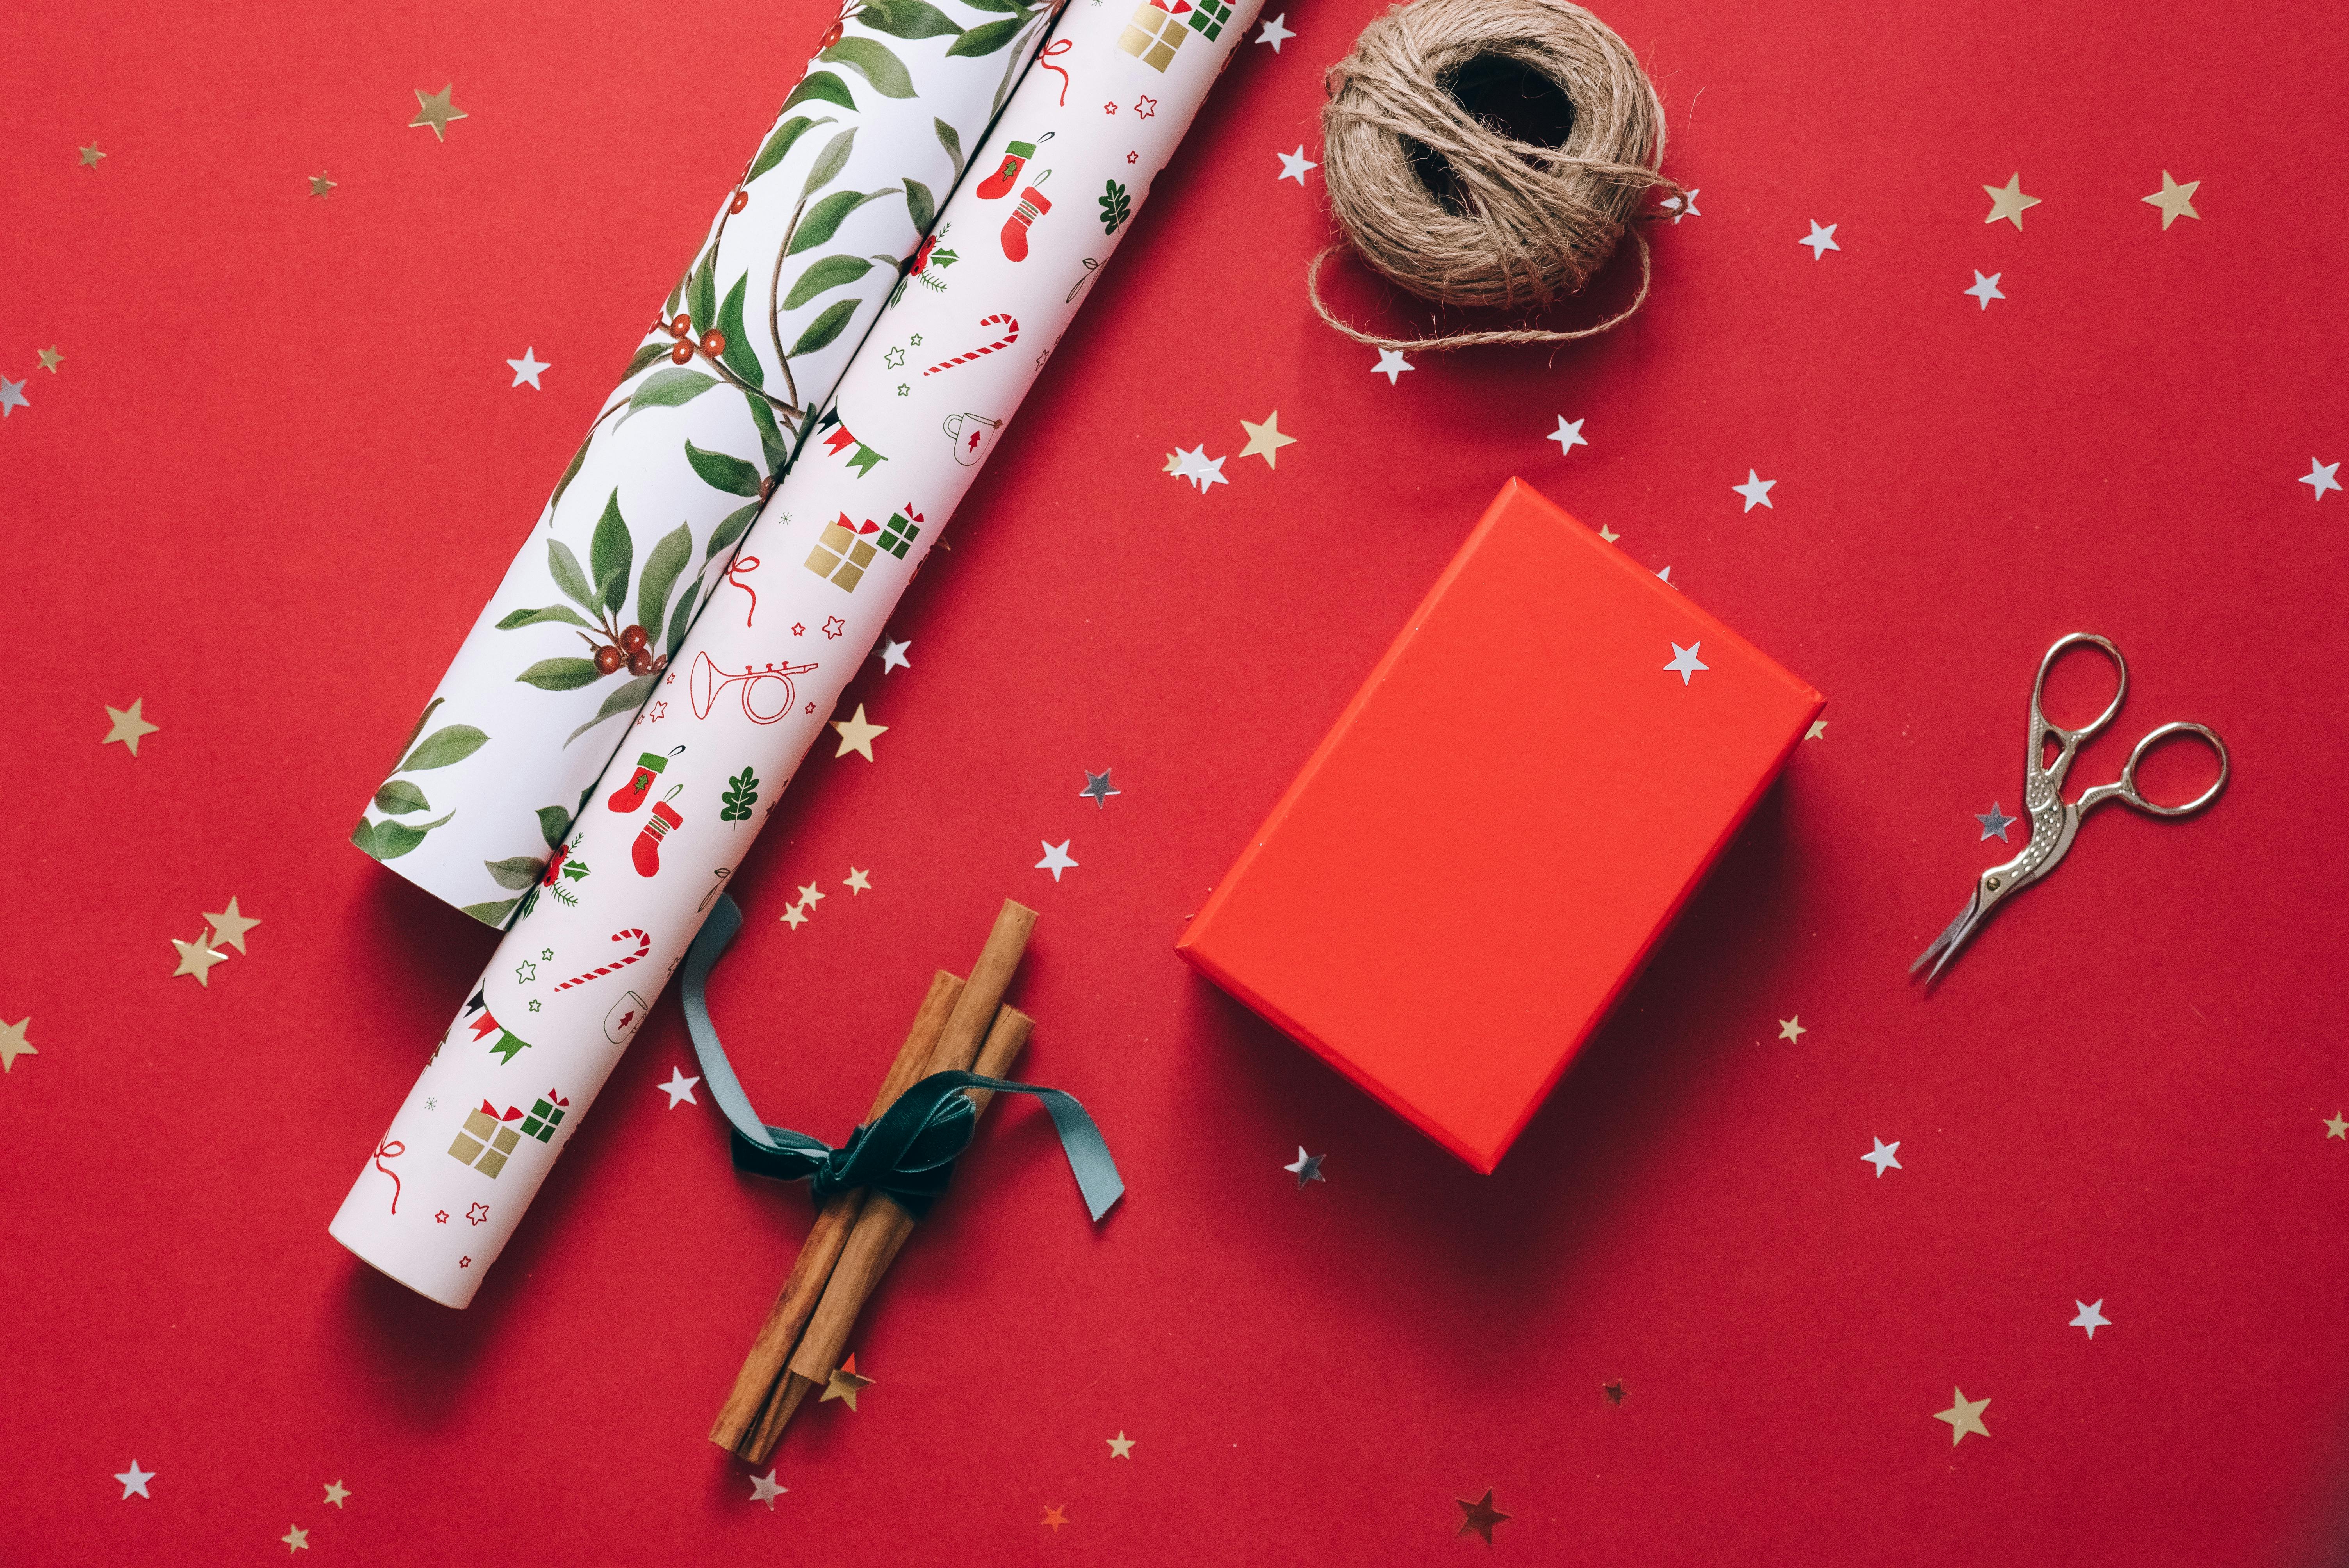 Tablet, Gifts & Pretty Wrapping Paper. Stock Image